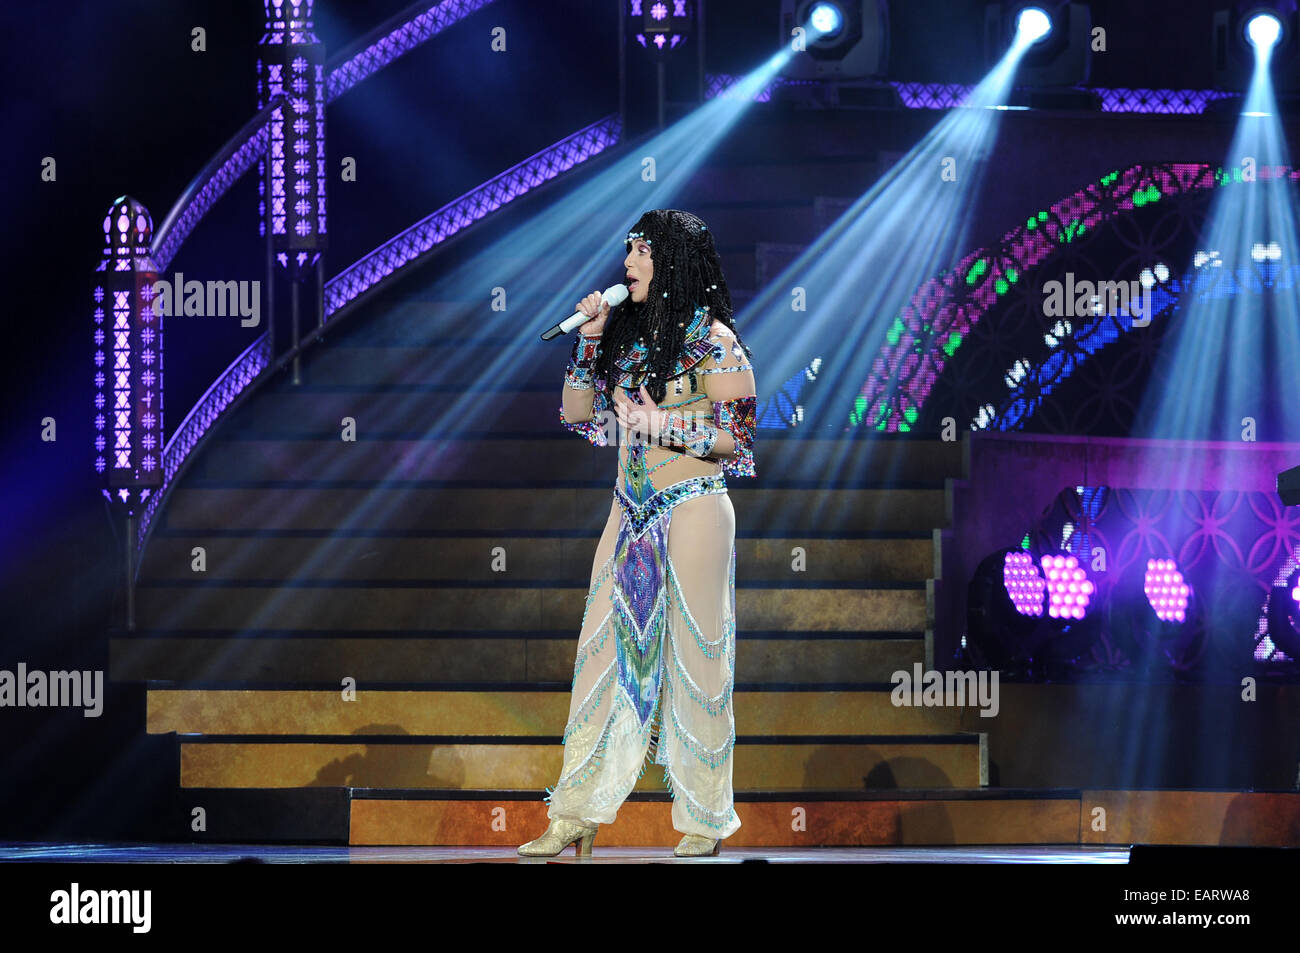 SUNRISE, FL - MAY 17: Cher performs during the D2K Tour at the BB&T Center on May 17, 2014 in Sunrise, Florida.  Featuring: Cher Where: Sunrise, Florida, United States When: 17 May 2014 Stock Photo